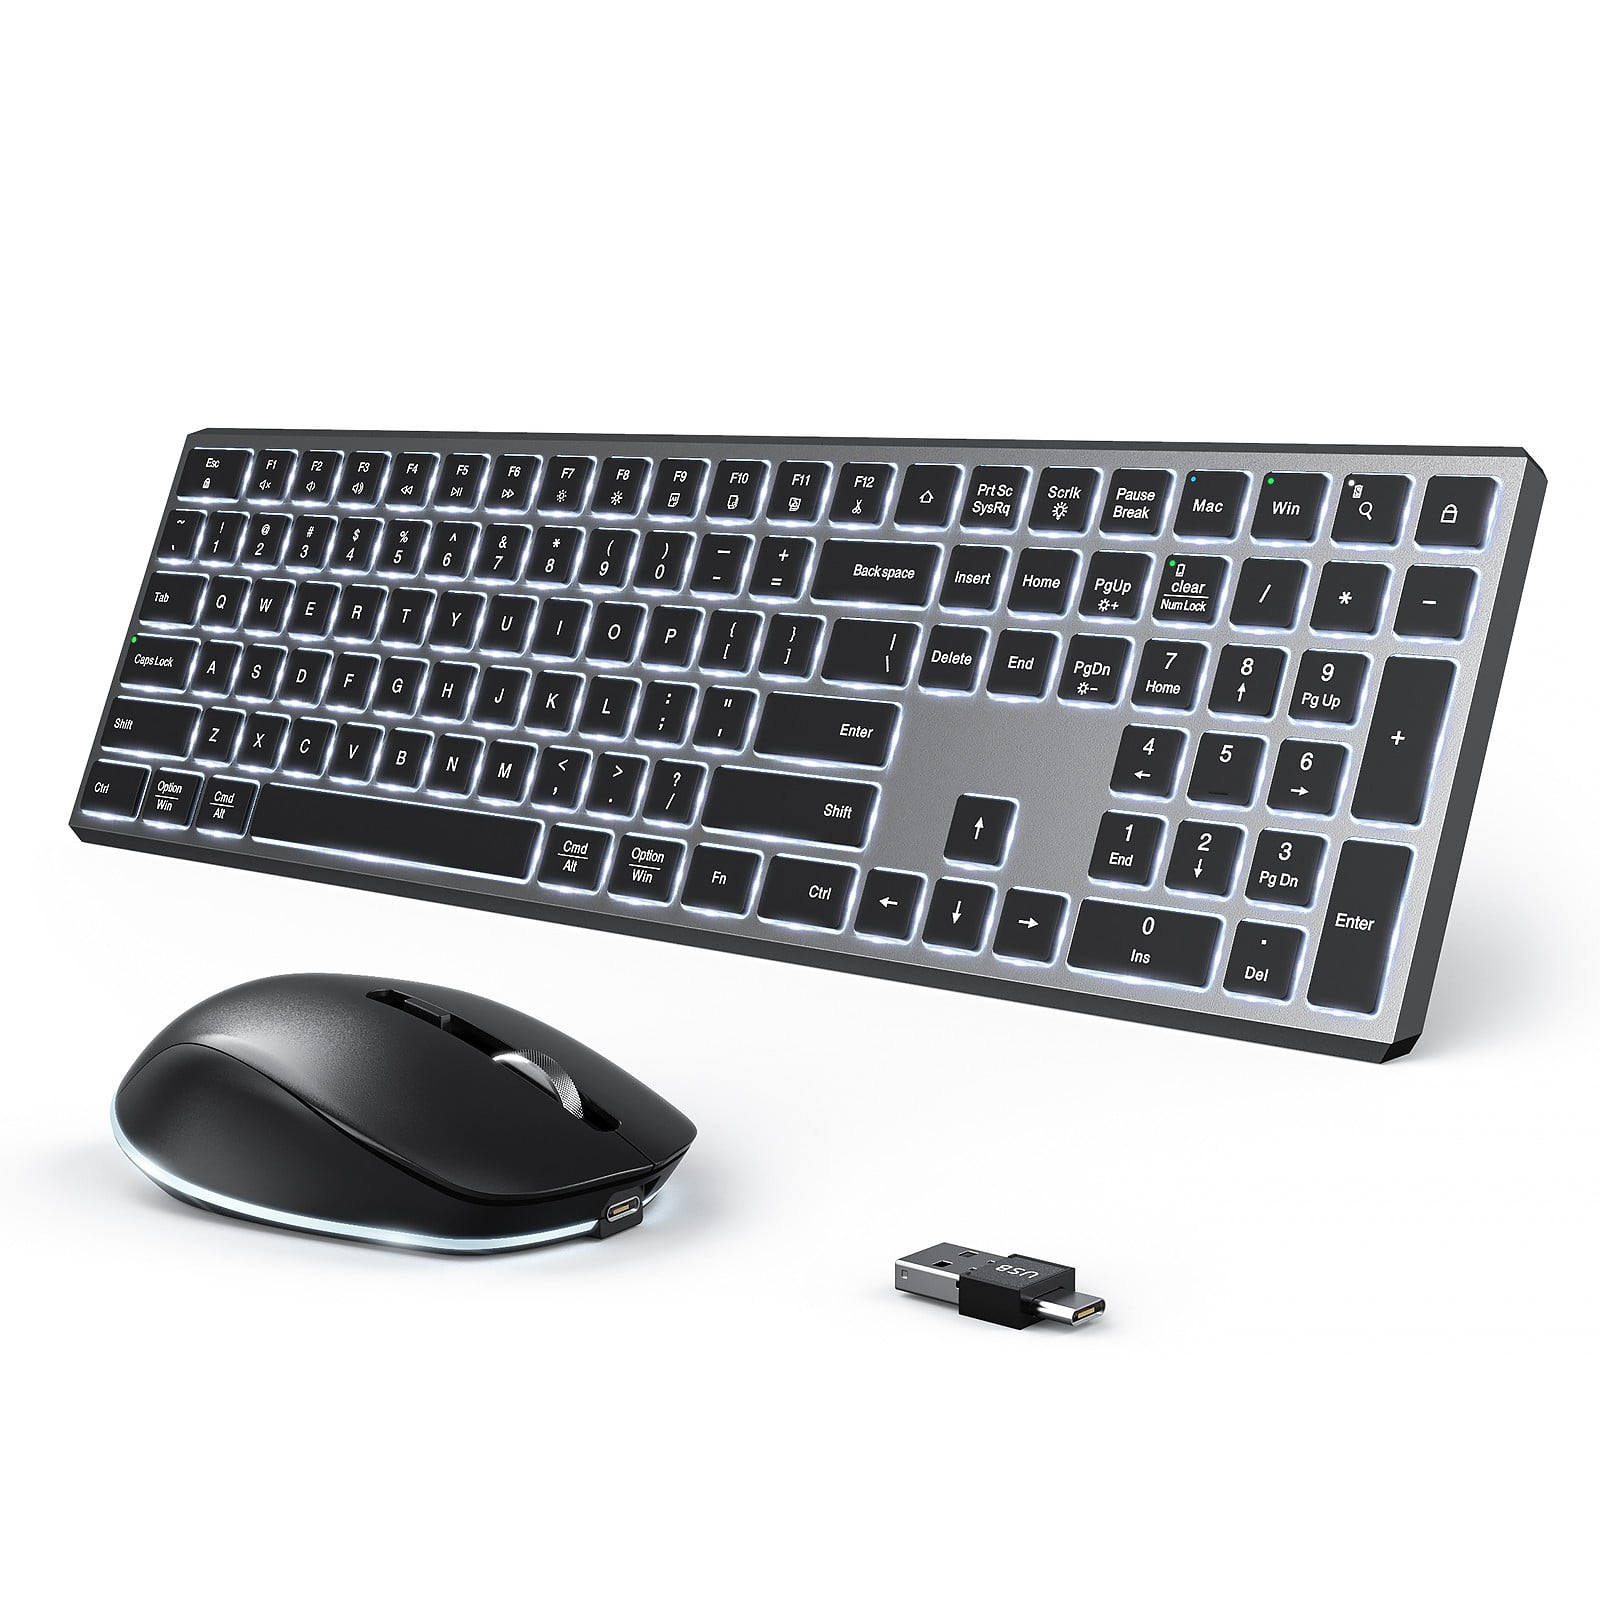 Mac Wireless Keyboard and Mouse - Mouse with Backlit, Rechargeable Silent Full Size Keyboard and Mouse Combo Compatible with Mac OS, Windows 7/8/10, MacBook air/pro, Laptop, Gray - Walmart.com